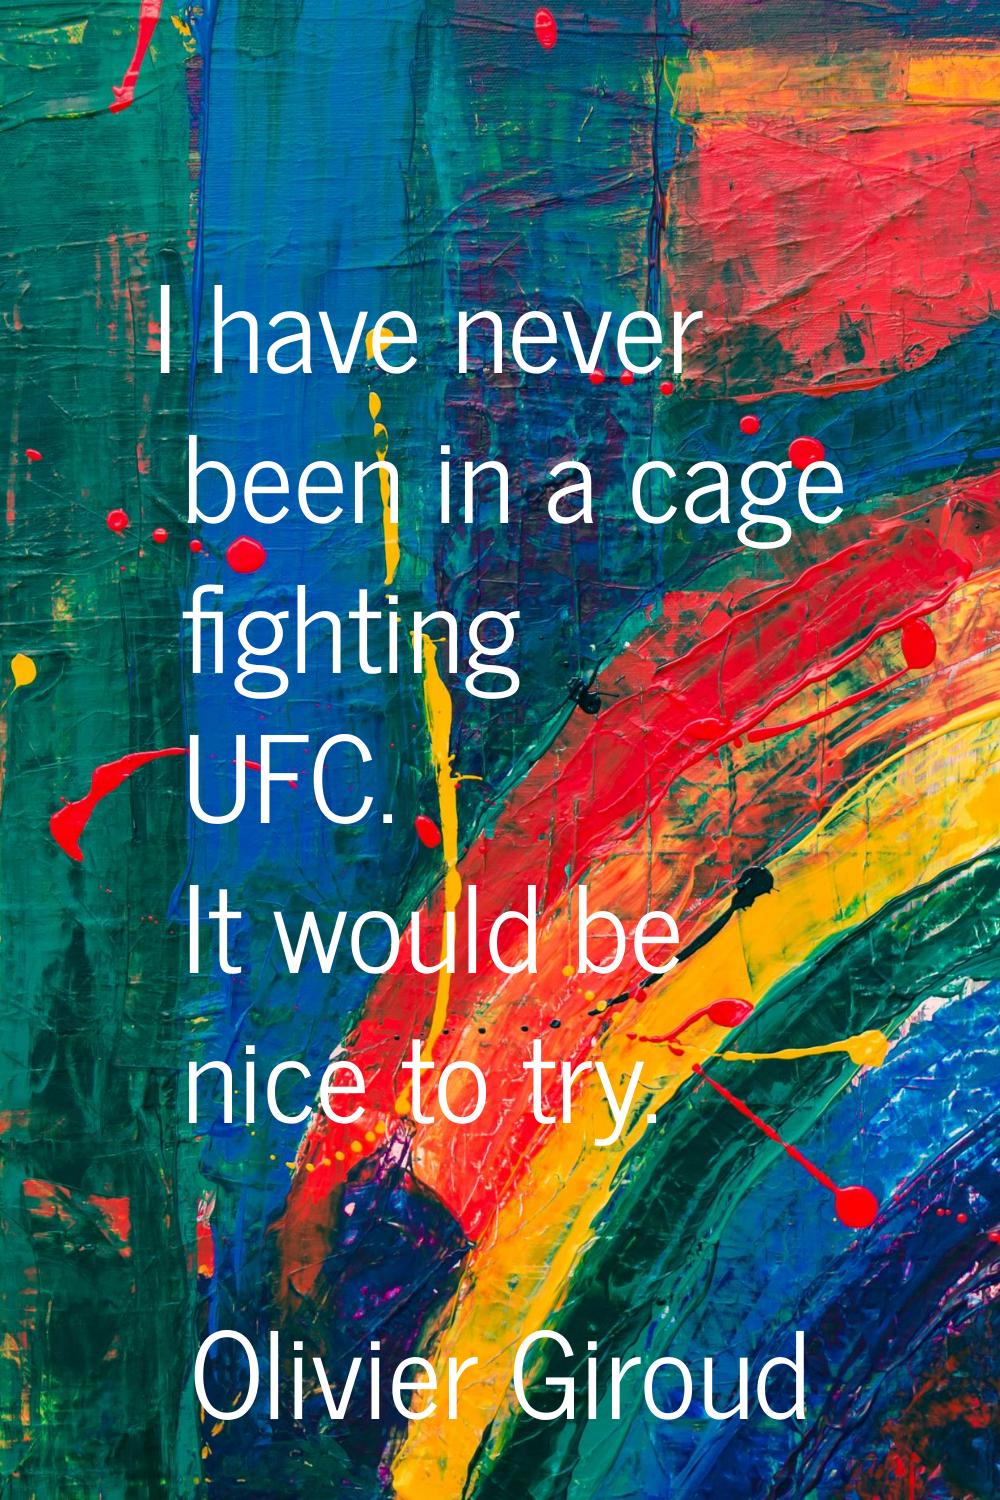 I have never been in a cage fighting UFC. It would be nice to try.